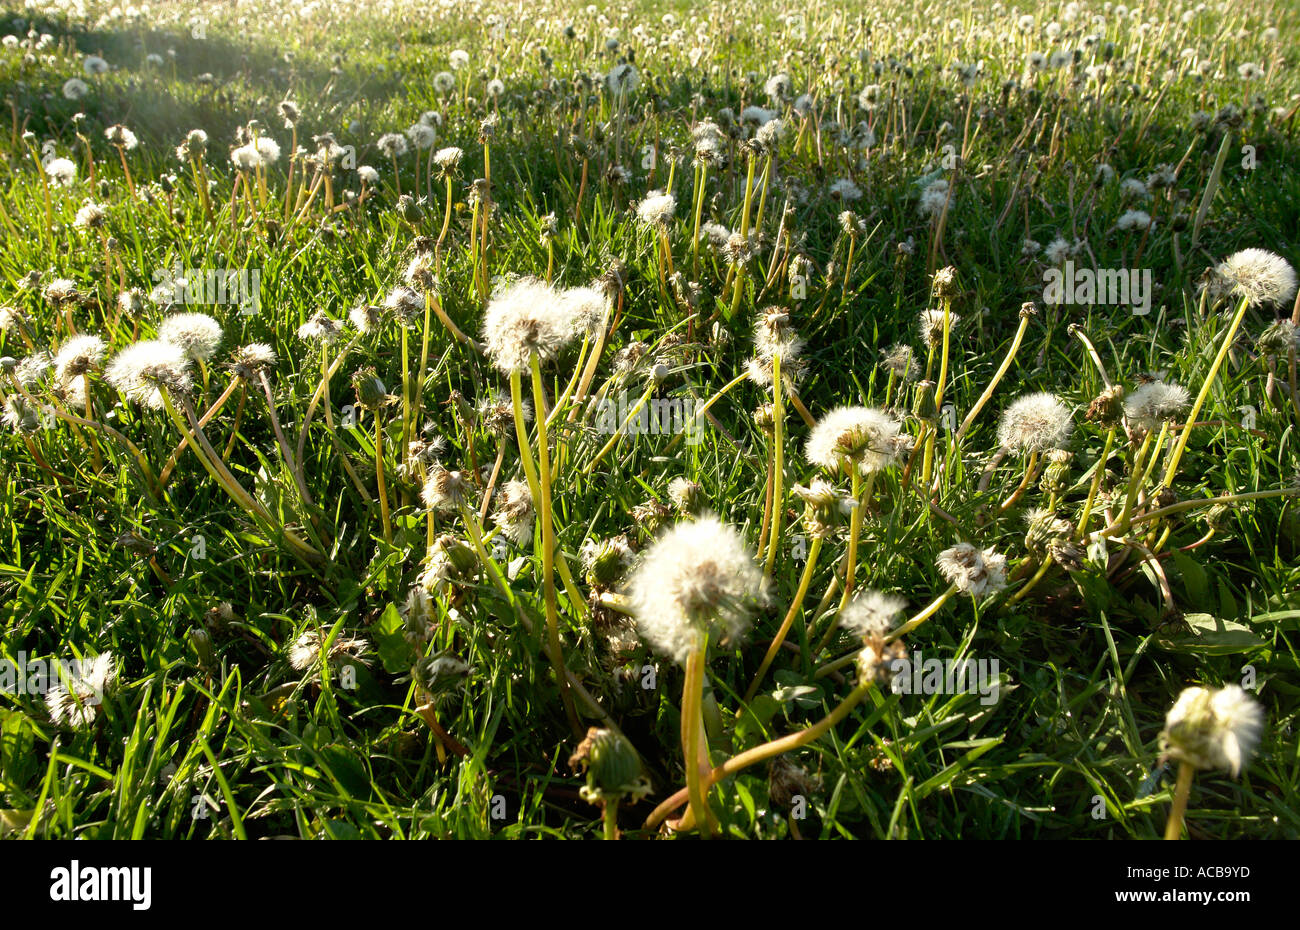 field of dandelions gone to seed Stock Photo